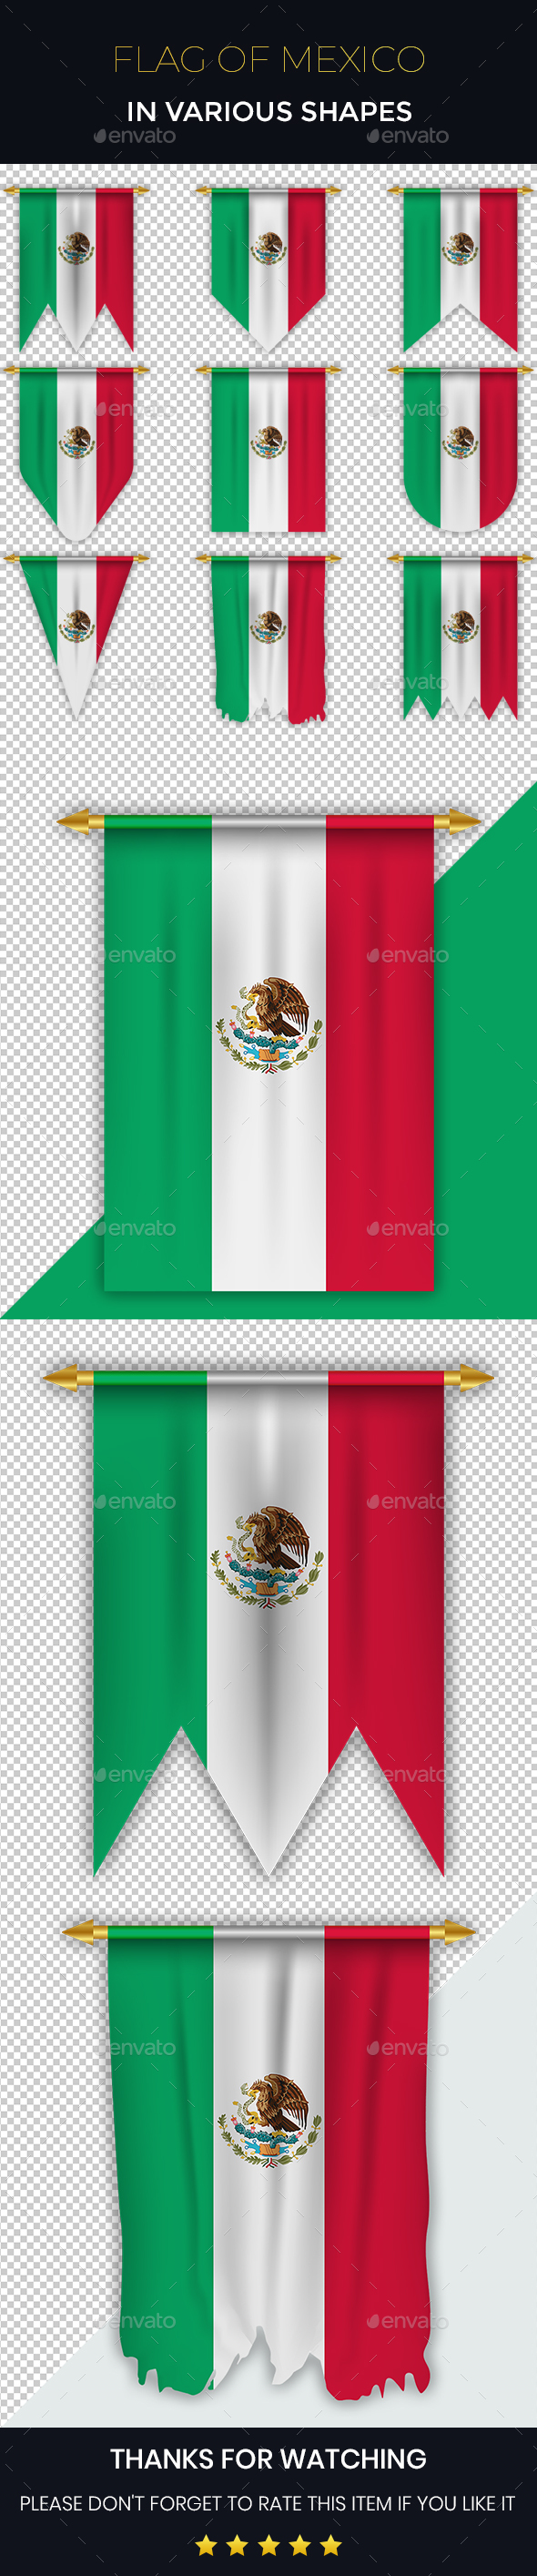 Mexico Flag in Various Shapes